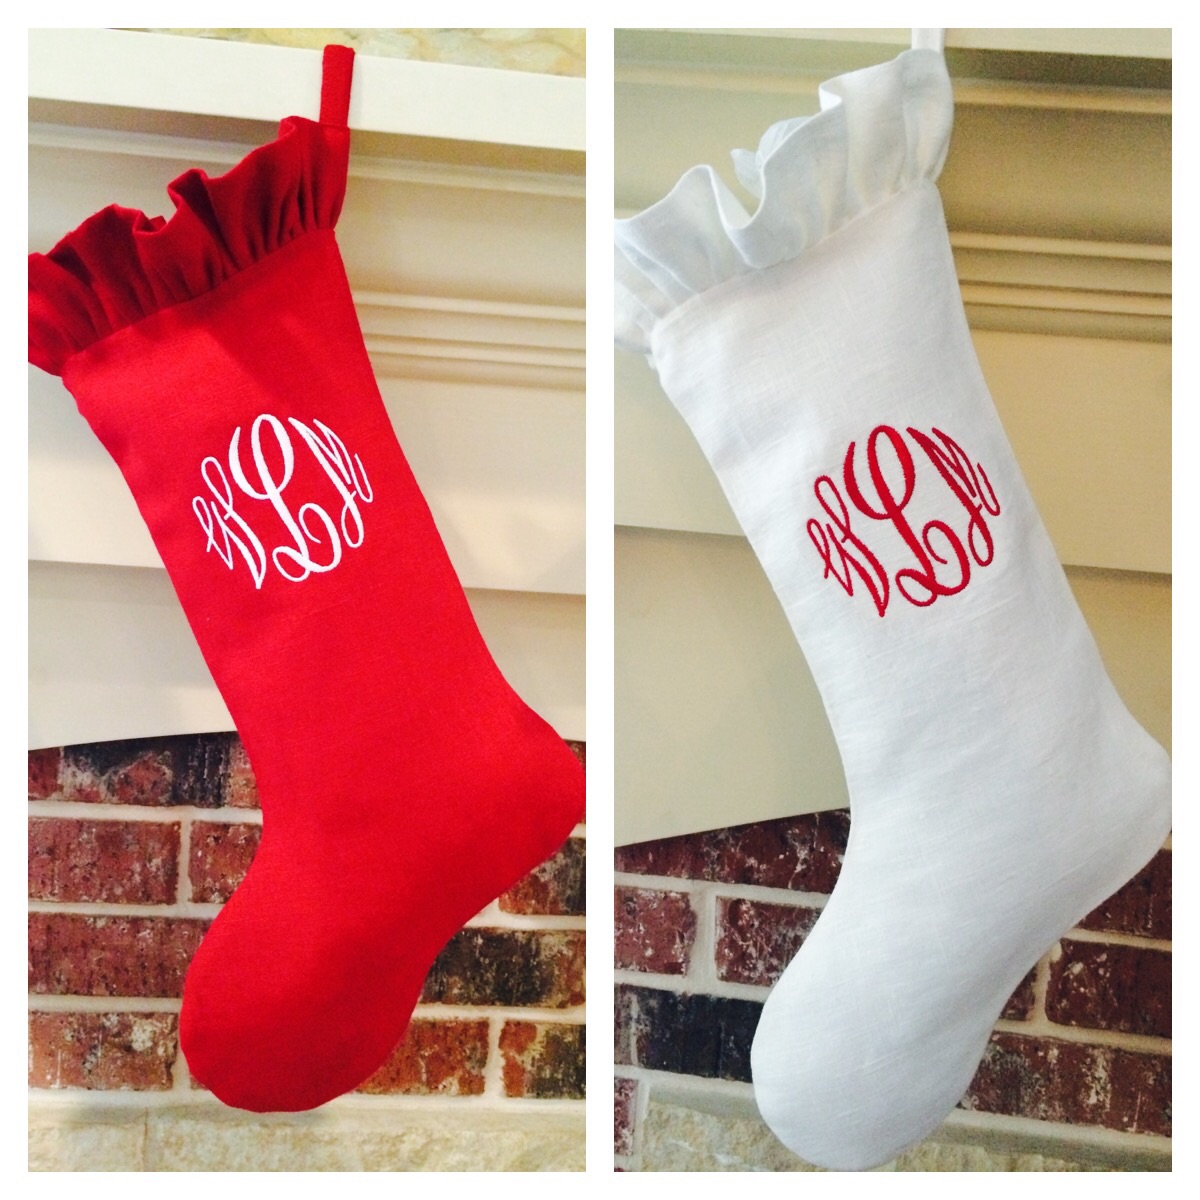 Wanda , Our beautiful linen Christmas stockings designed with an elegant monogram and ruffle detailing makes...